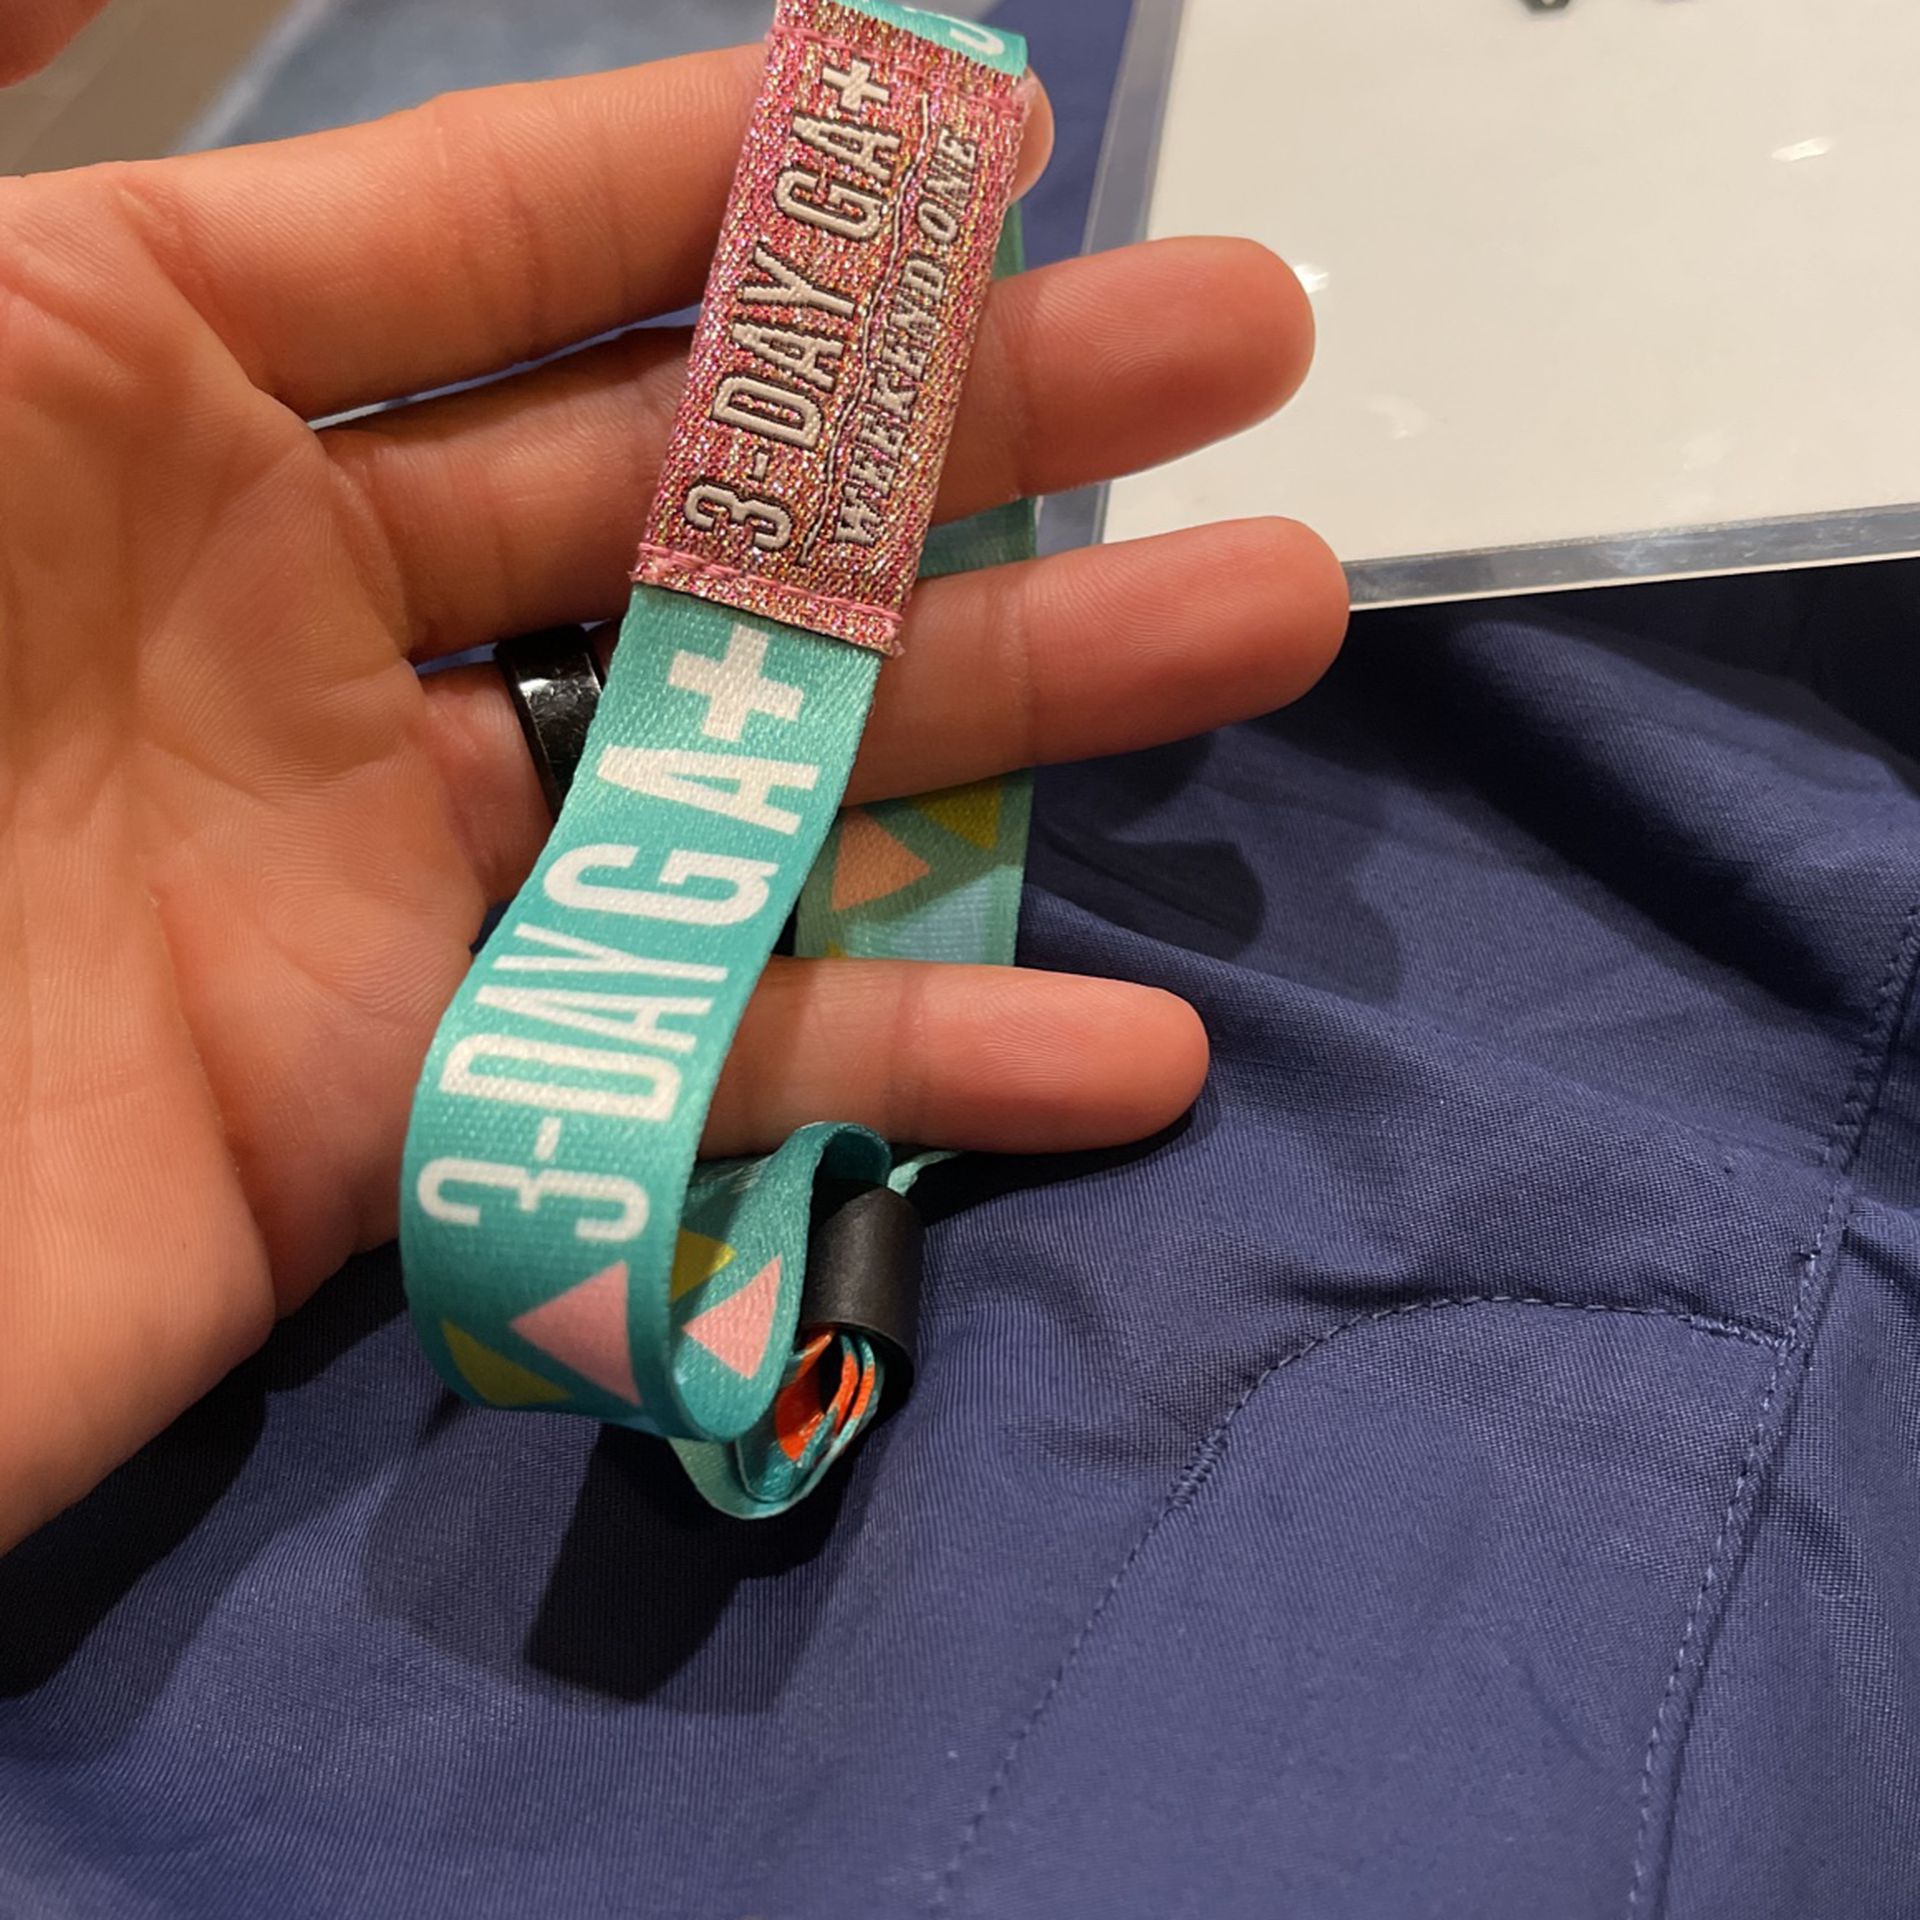 Acl 3 Day Wristbands For Sale for Sale in Austin, TX - OfferUp